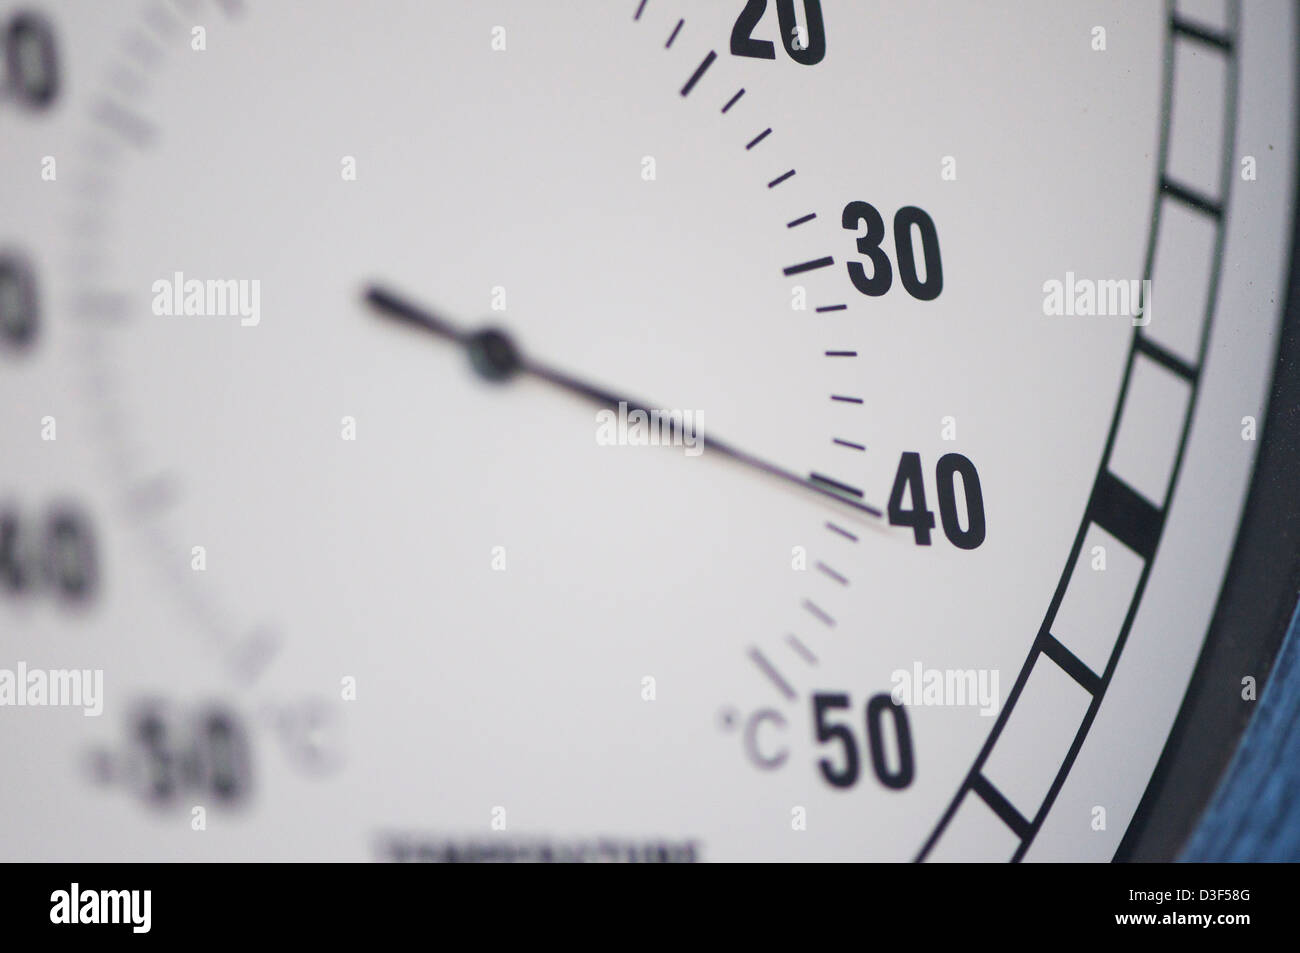 A temperature gauge showing 40c Stock Photo